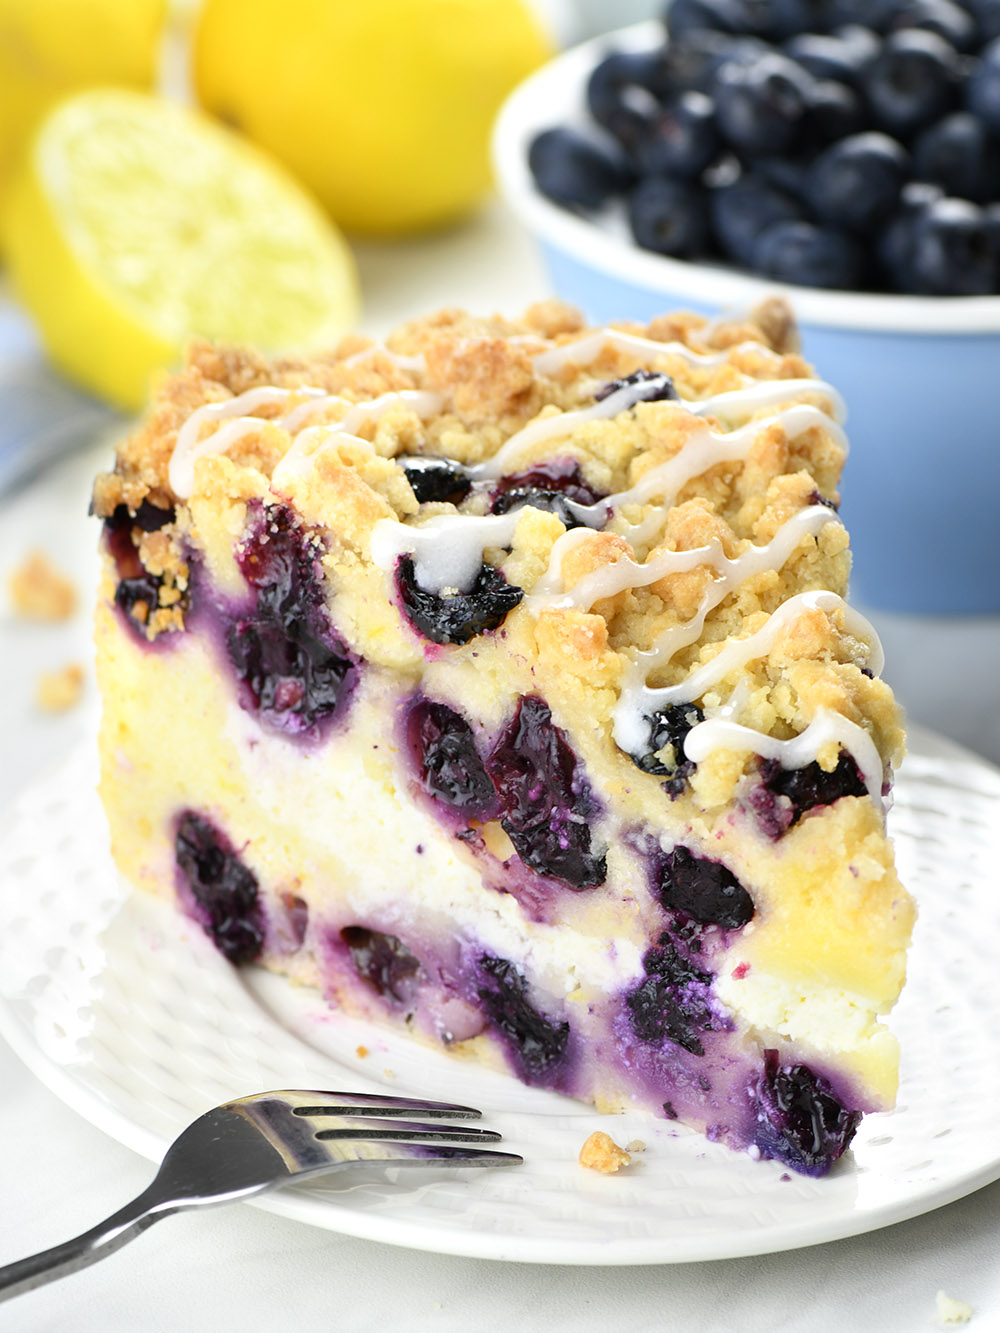 A delectable piece of Lemon Blueberry Coffee Cake is presented on a clean, white plate. The cake has a moist, golden-brown crumb texture, with dots of bright, juicy blueberries and a delicate lemon glaze. Fresh lemons and a scattering of ripe blueberries in the background provide a colorful contrast. The composition is shot from a side angle, emphasizing the fluffy thickness of the cake slice.